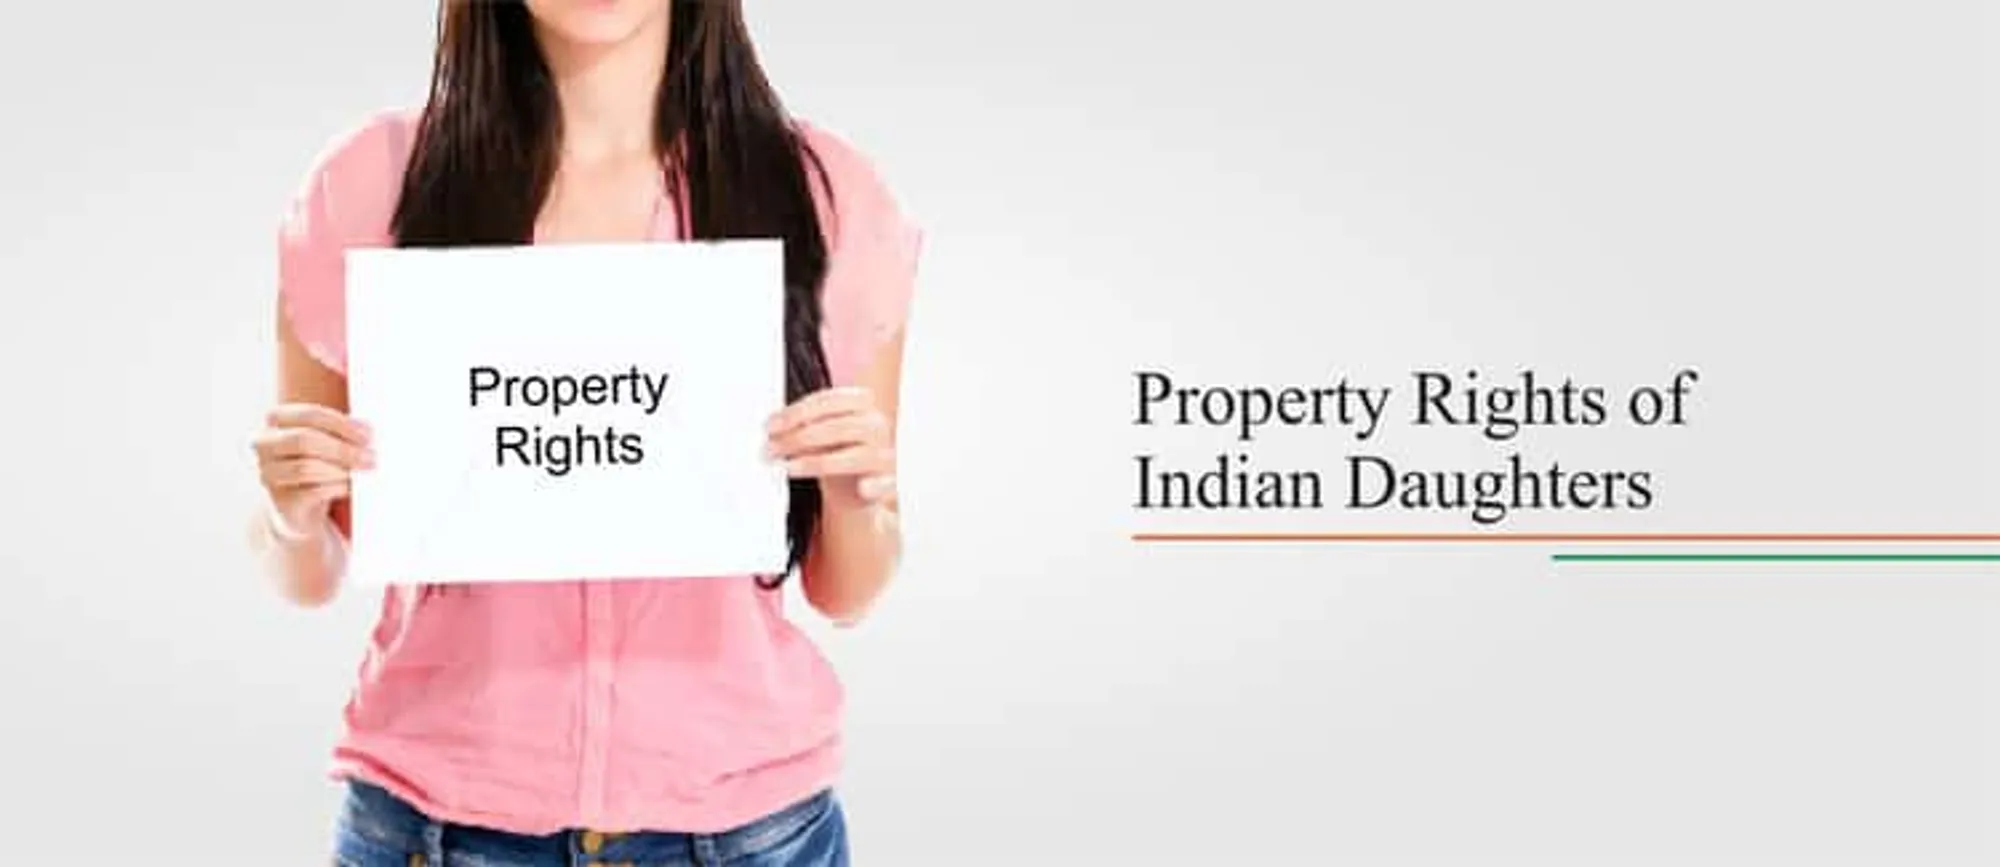 Property Rights of Indian Daughters